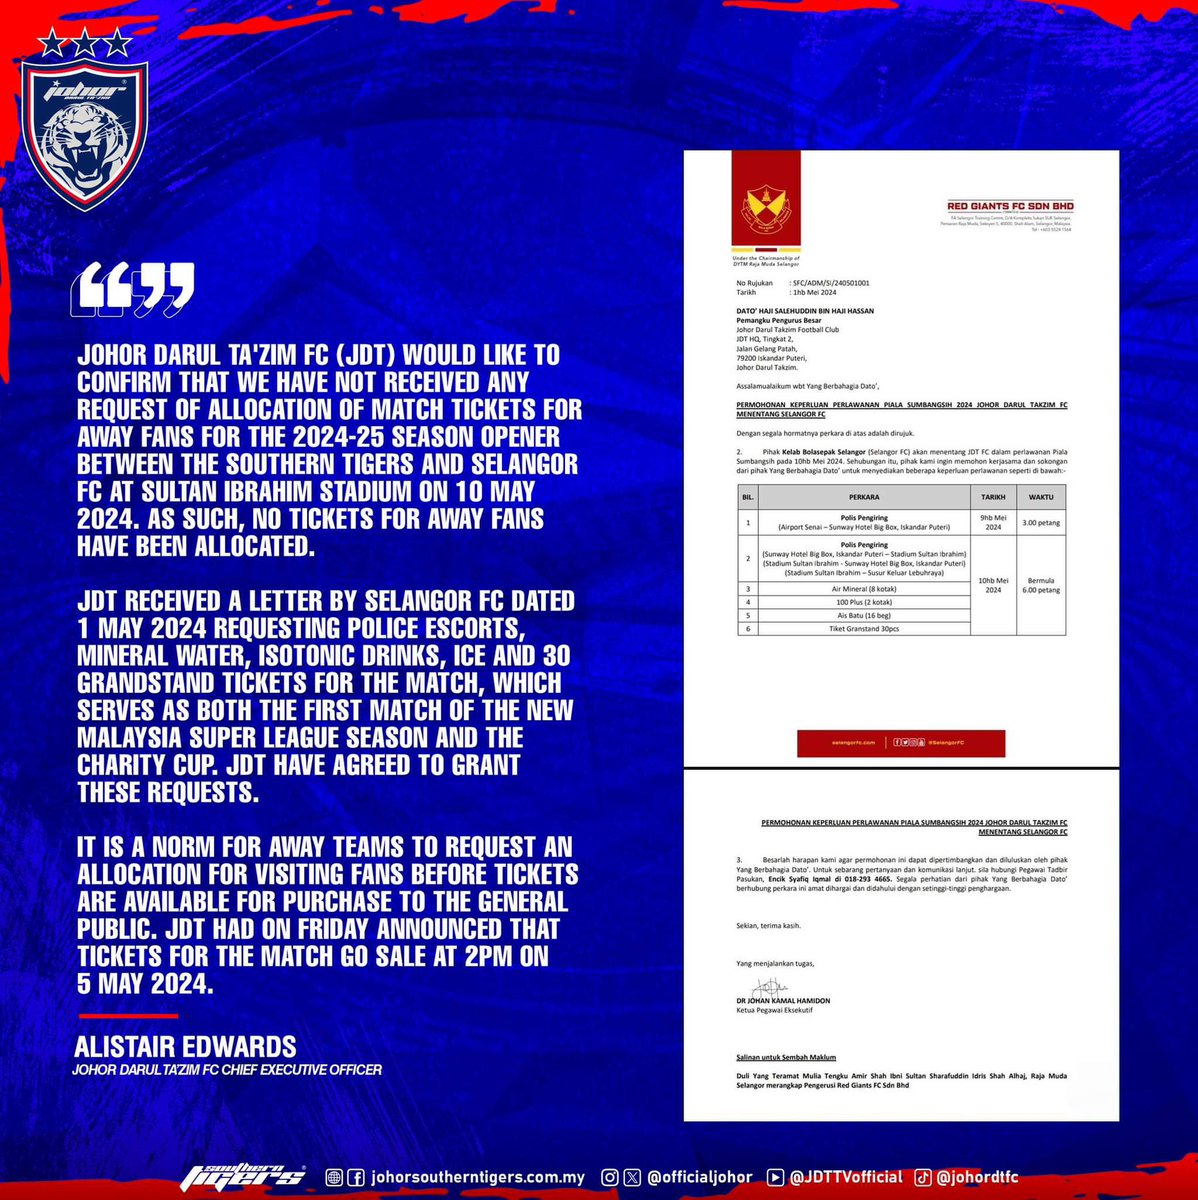 Johor Darul Ta'zim FC (JDT) would like to confirm that we have not received any request of allocation of match tickets for away fans for the 2024-25 season opener between the Southern Tigers and Selangor FC at Sultan Ibrahim Stadium on 10 May 2024. As such, no tickets for away…